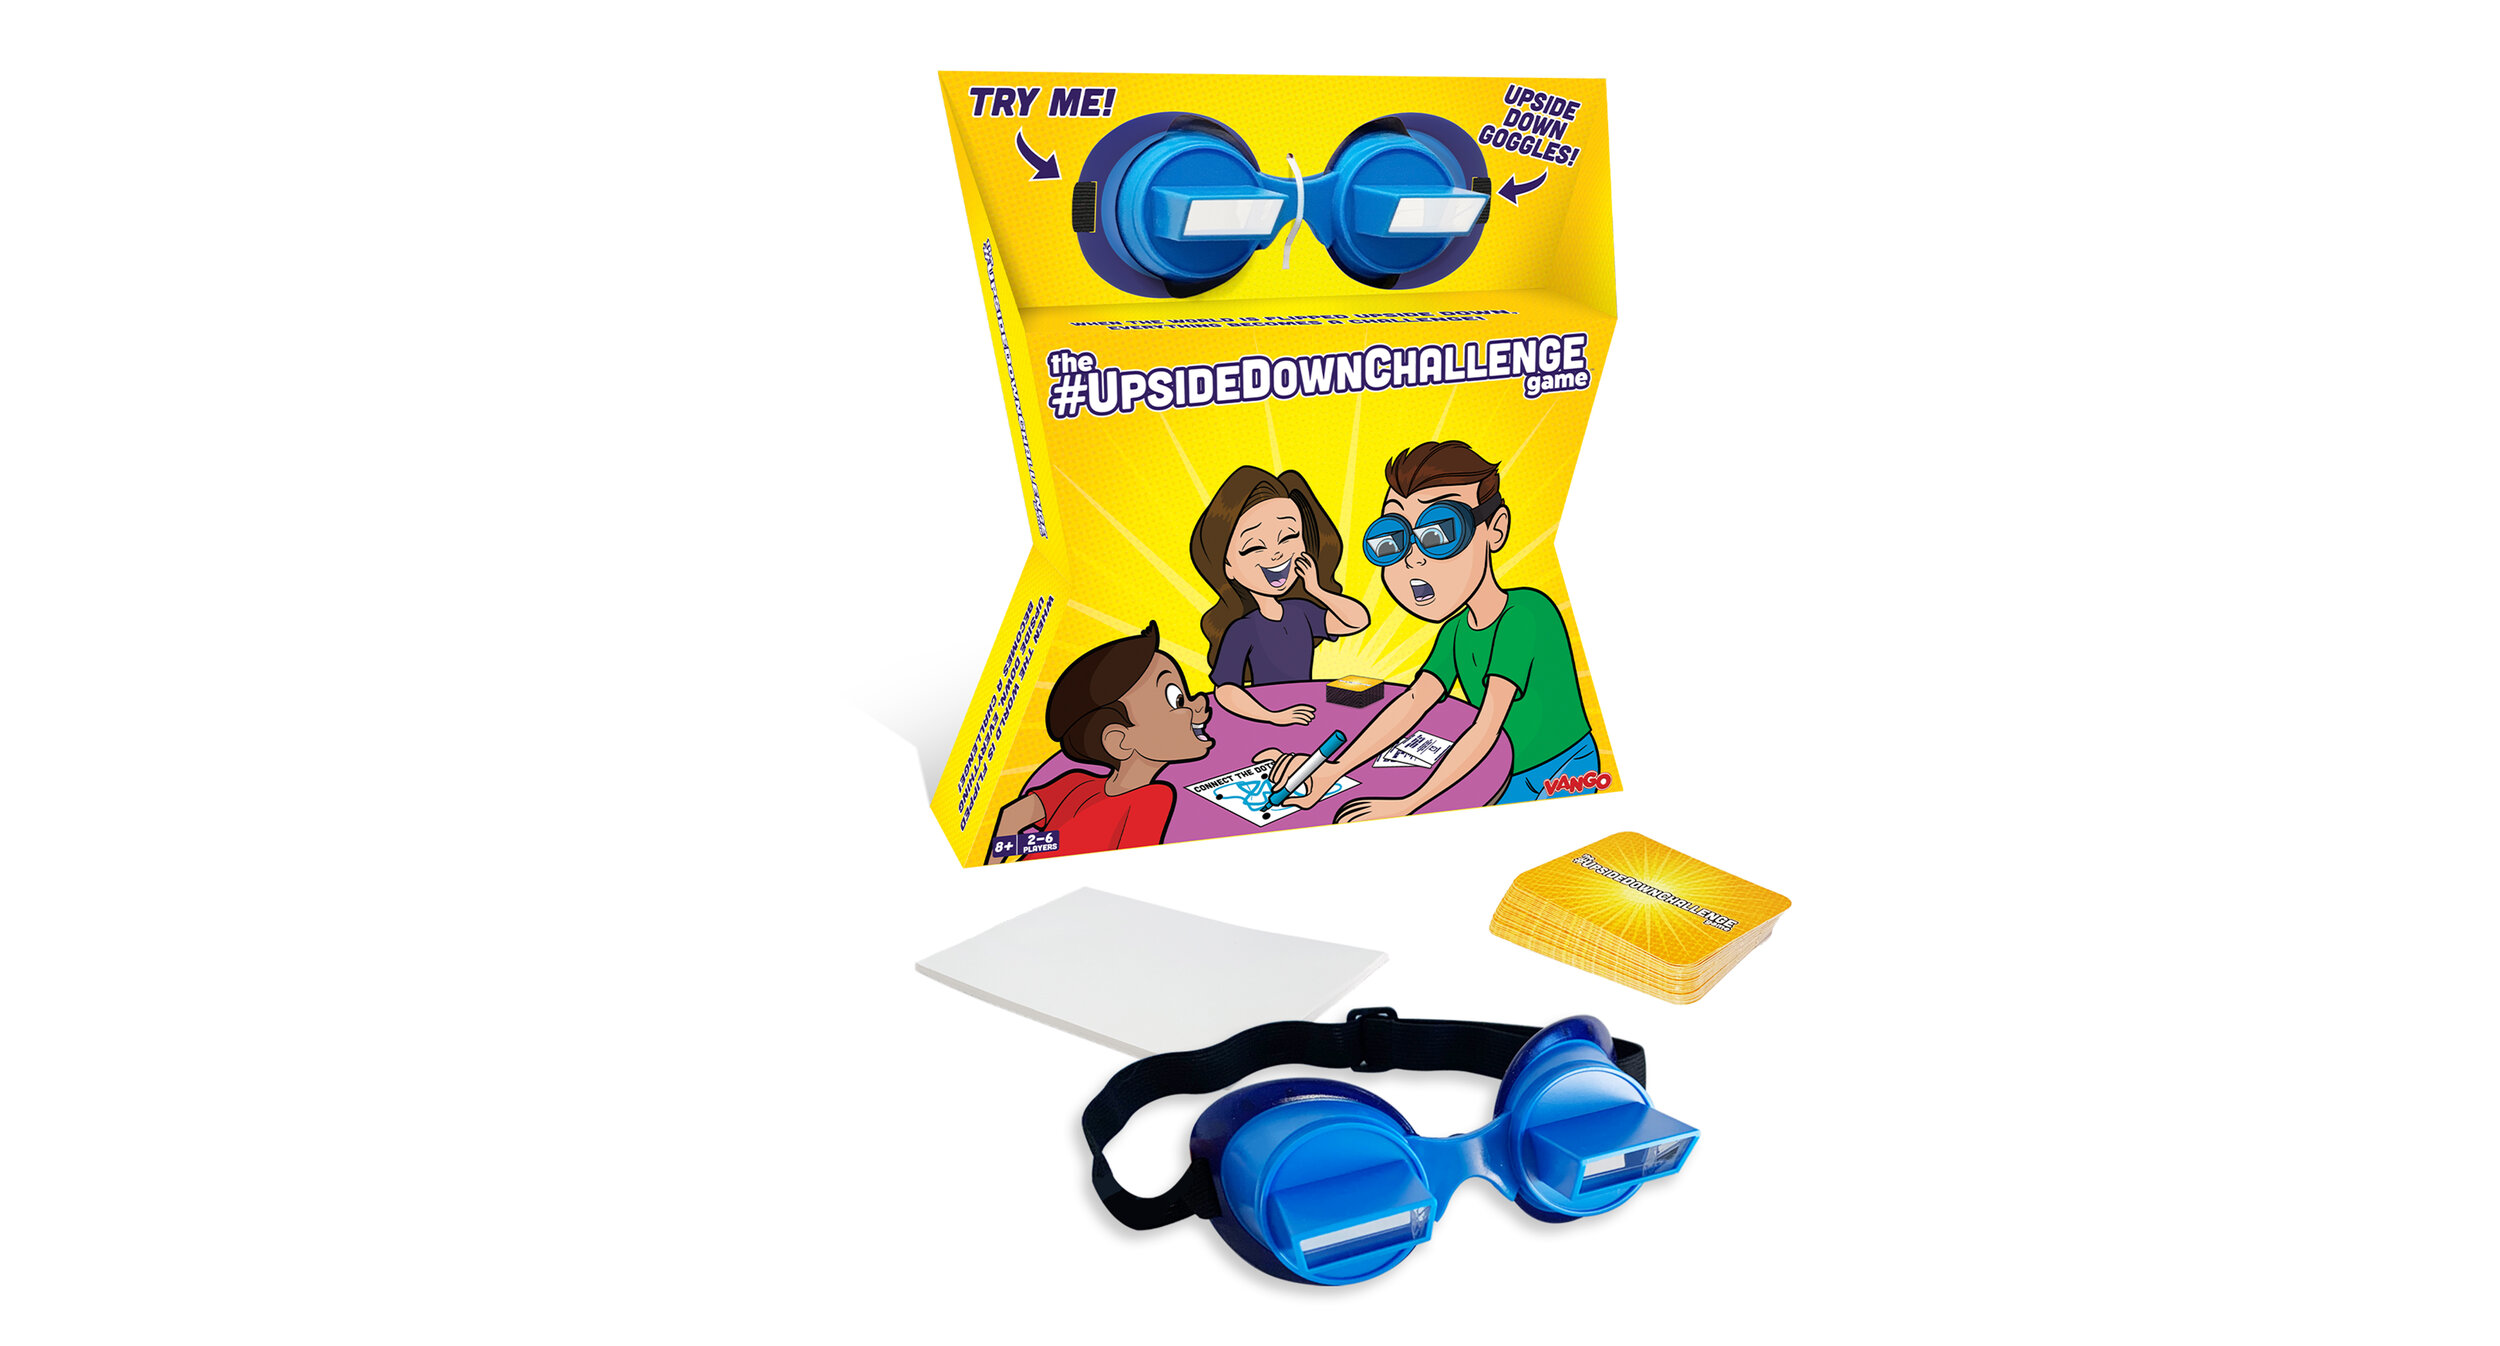 UpsideDownChallenge Game for Kids & Family - Complete Fun Challenges with  Upside Down Goggles - Hilarious Game for Game Night and Parties - Ages 8+